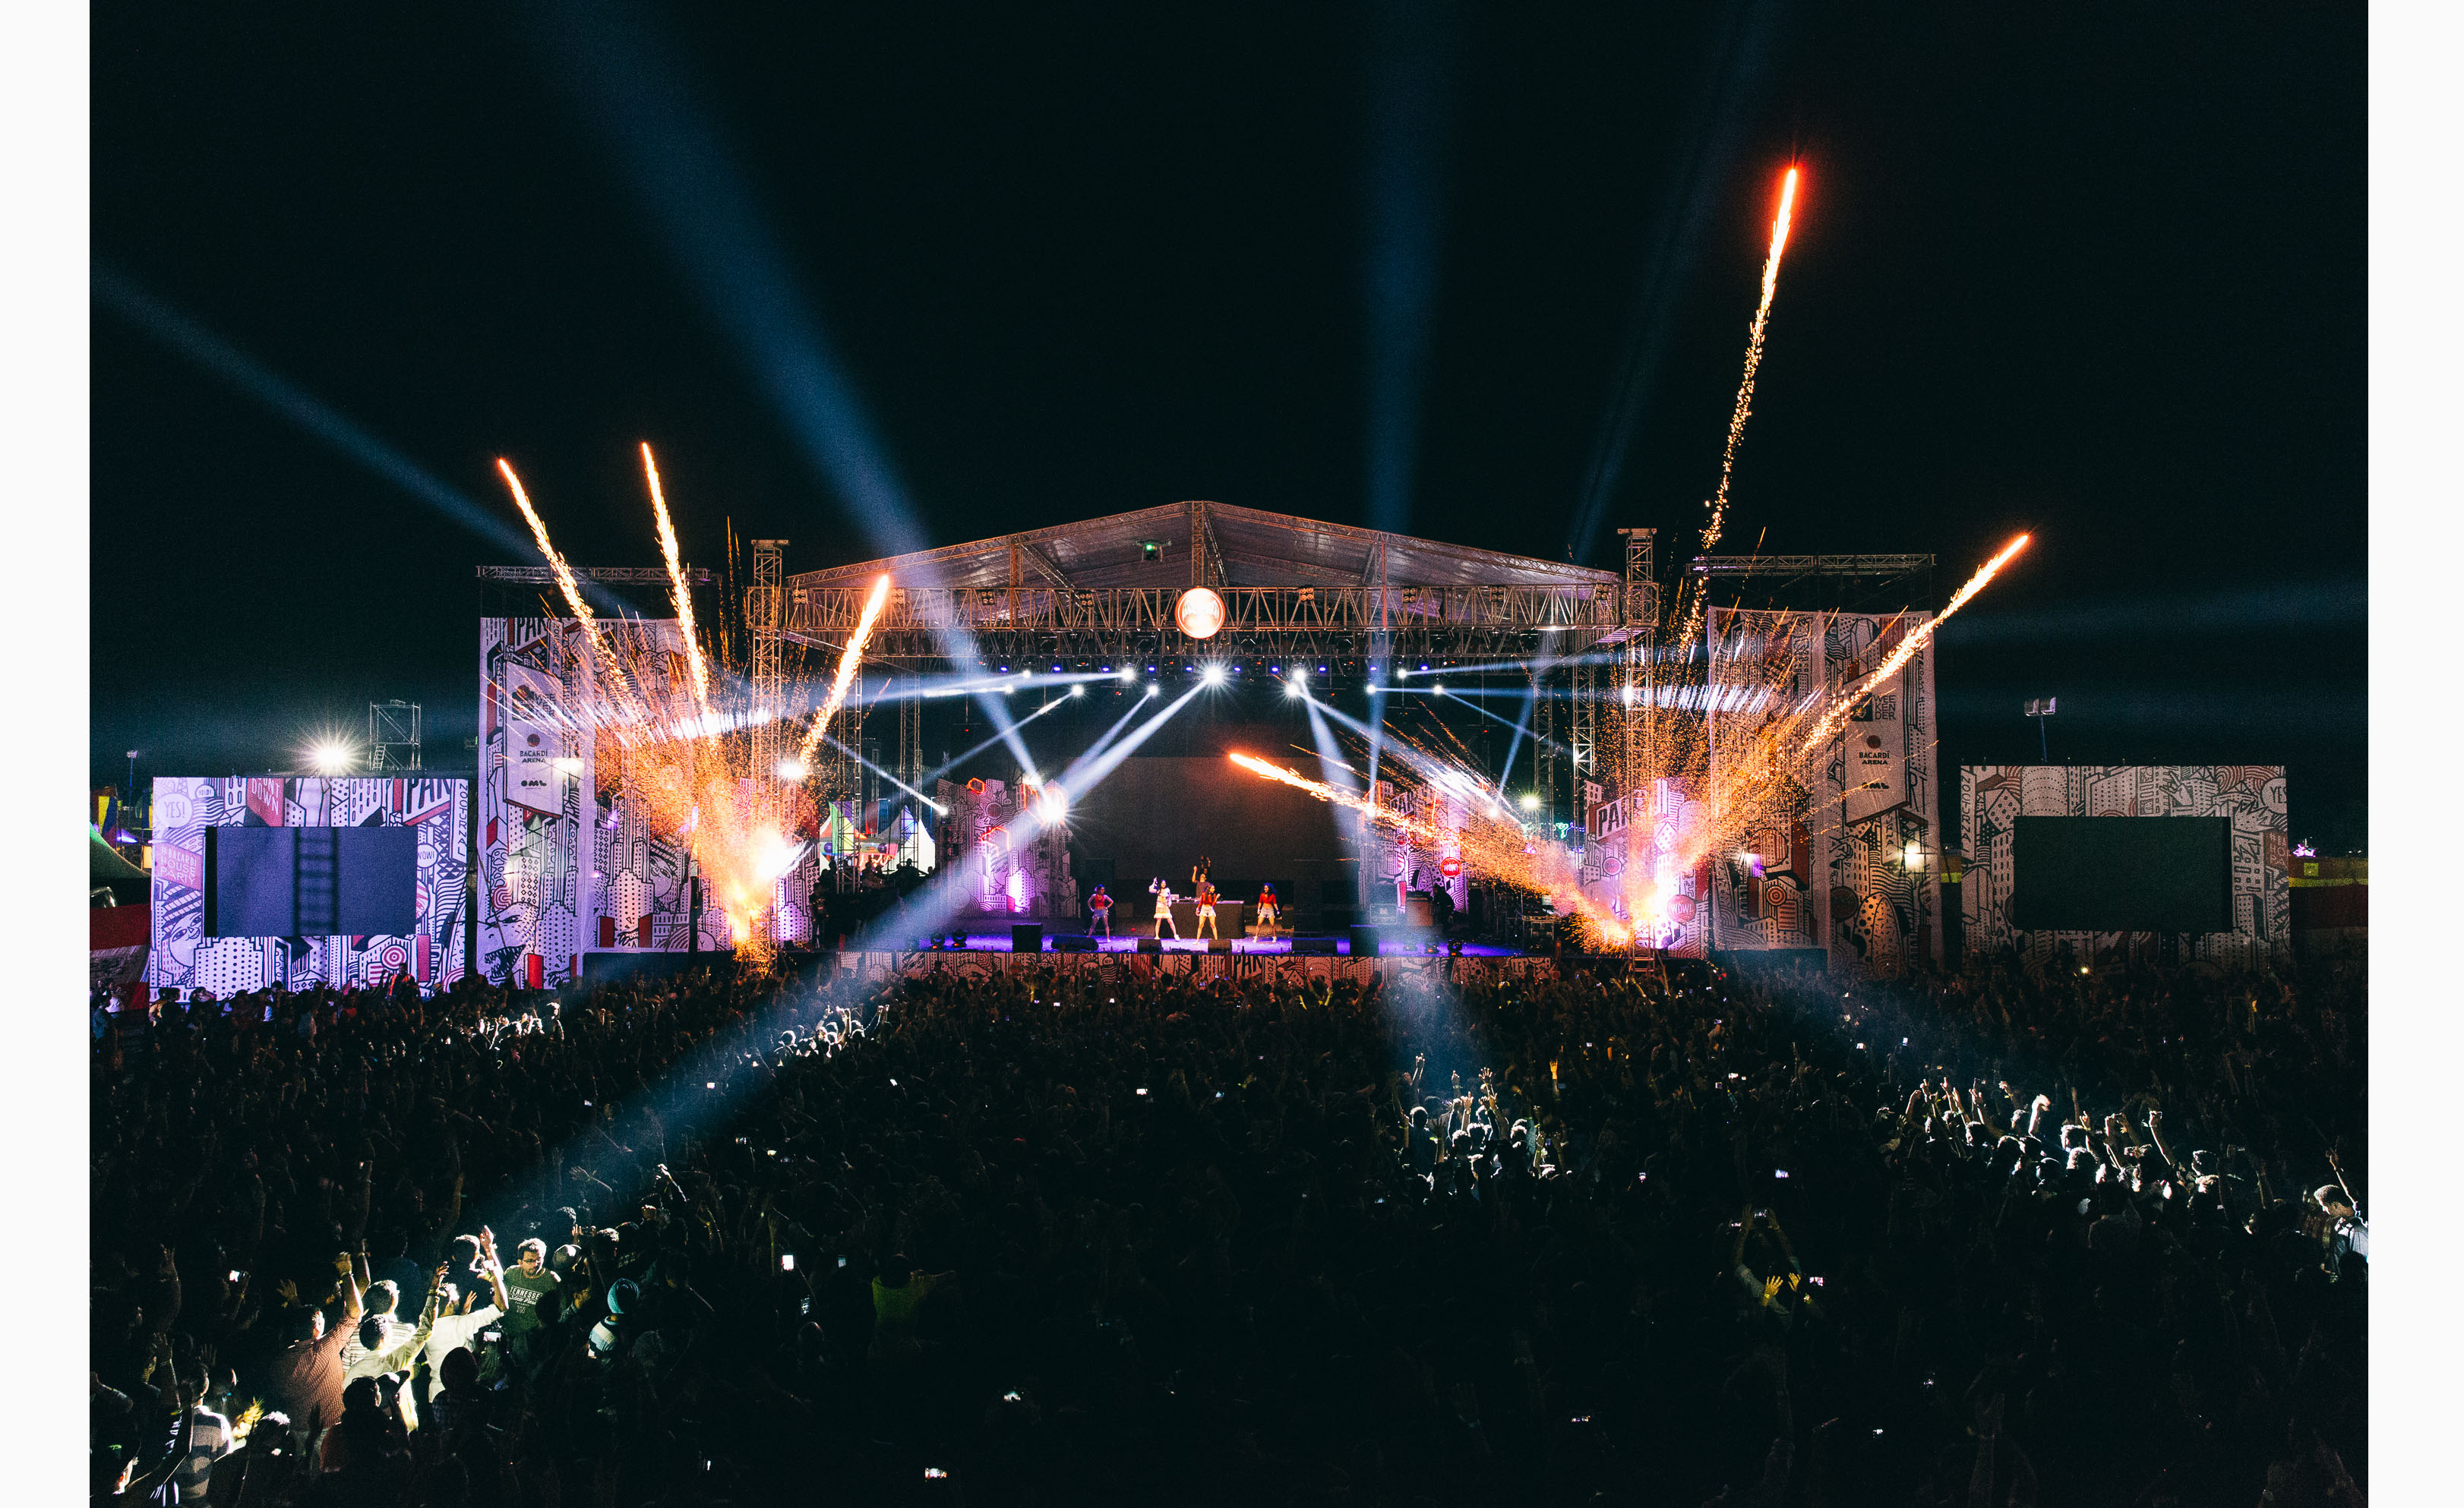  Day One of the Pune edition of BACARDI NH7 Weekender-1. Photo credit - Maanas Singh